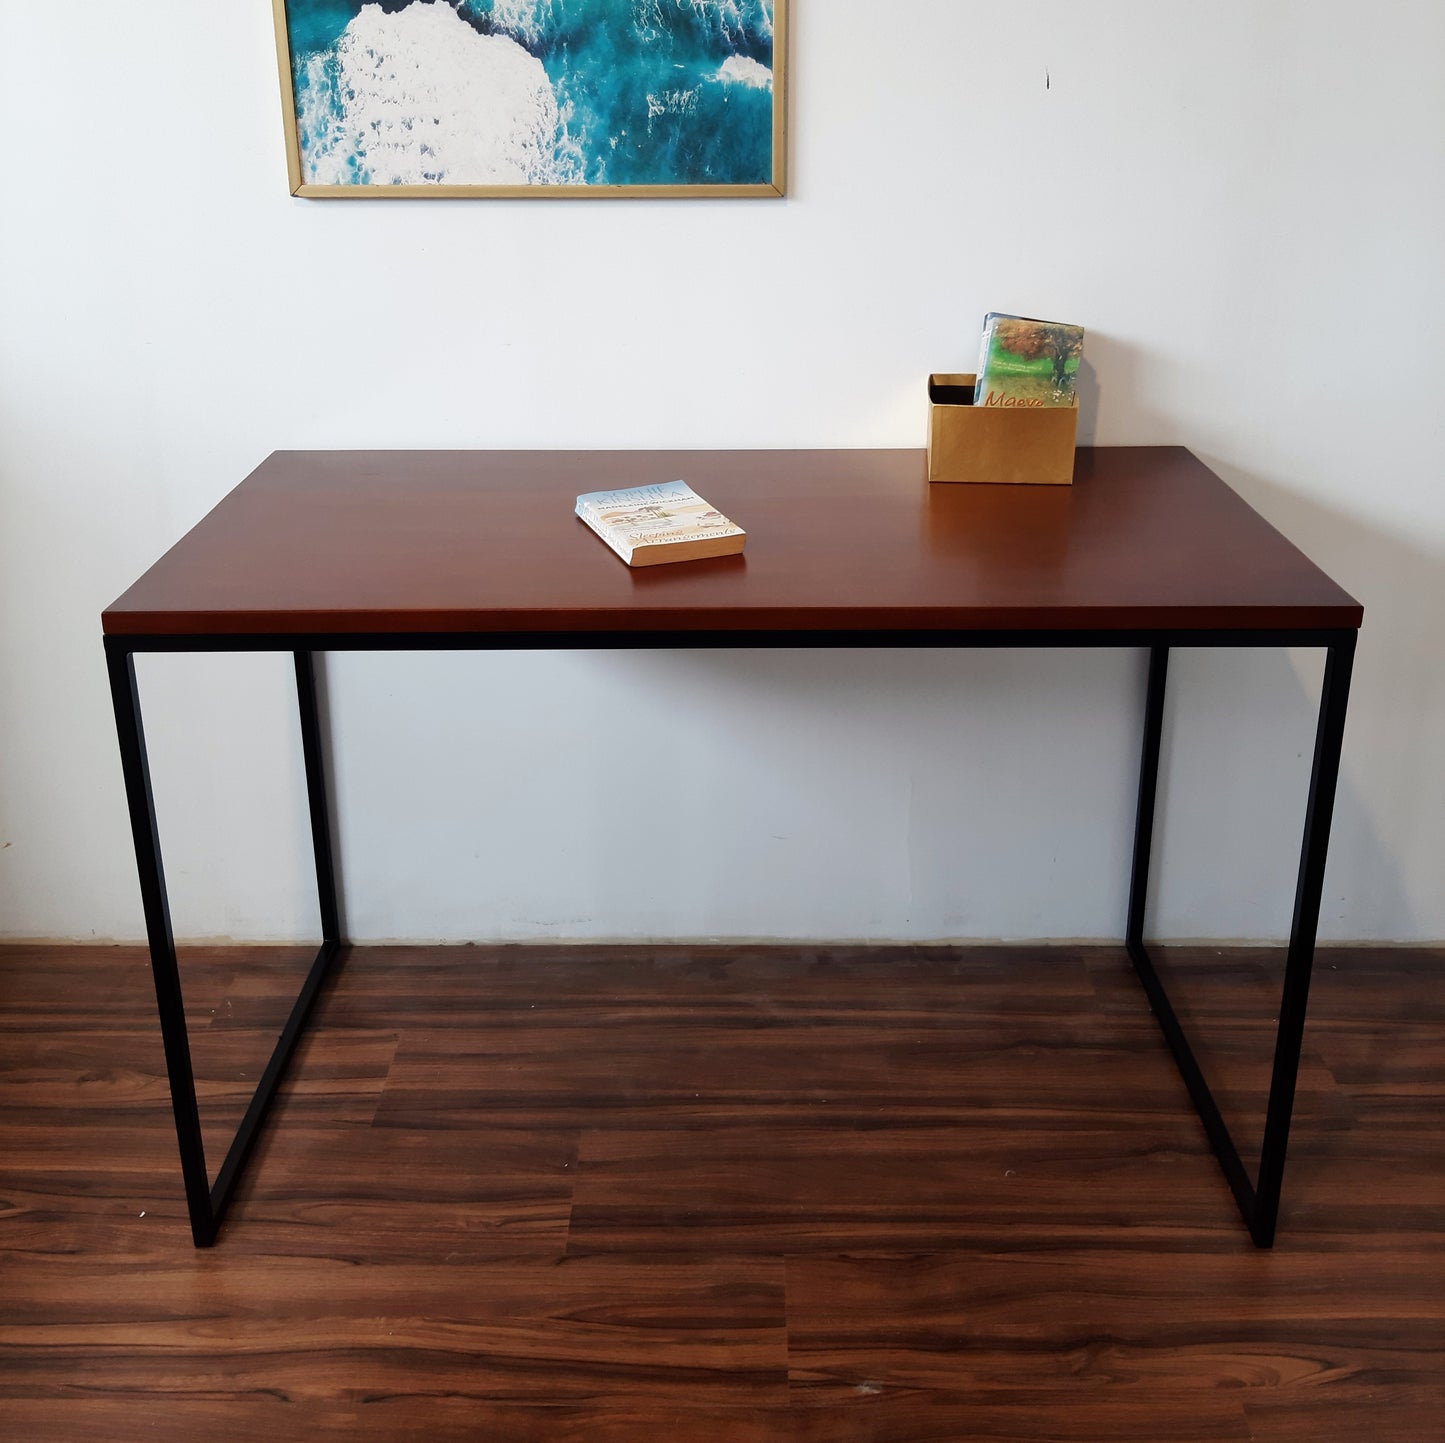 Vinto Wood Finish Table - 4 x 2